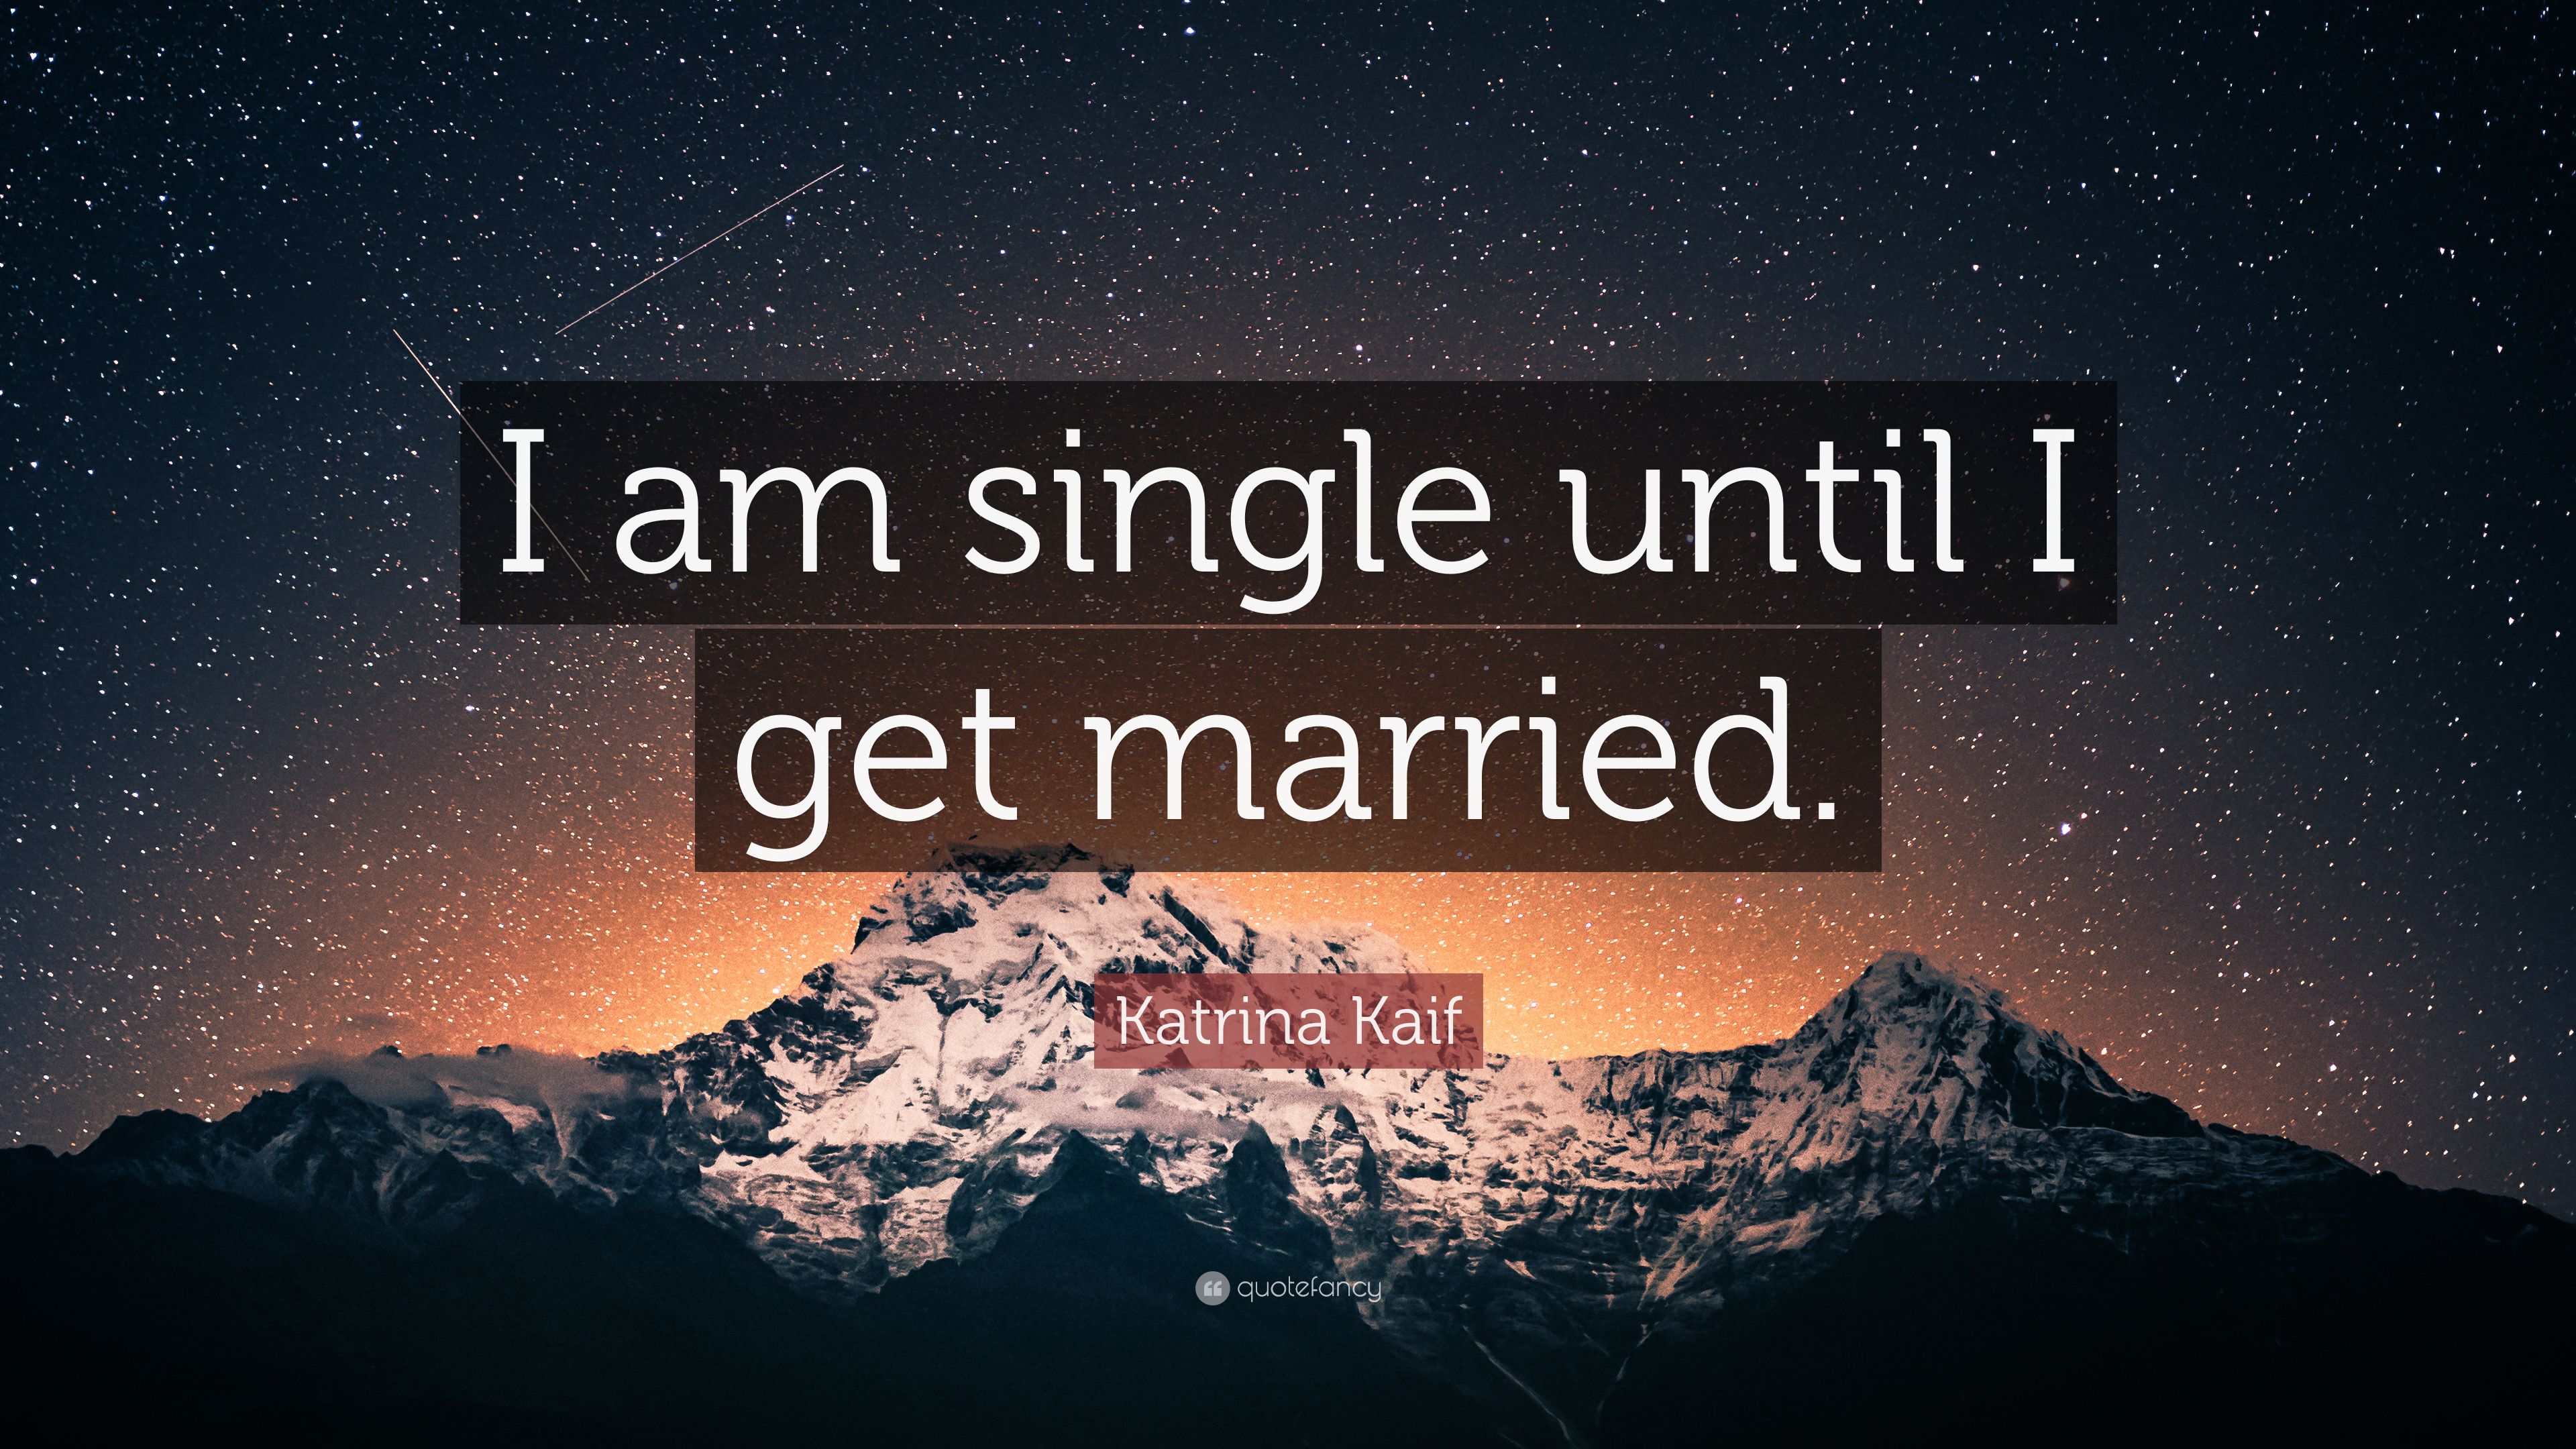 Katrina Kaif Quote: “I am single until I get married.” (10 wallpaper)